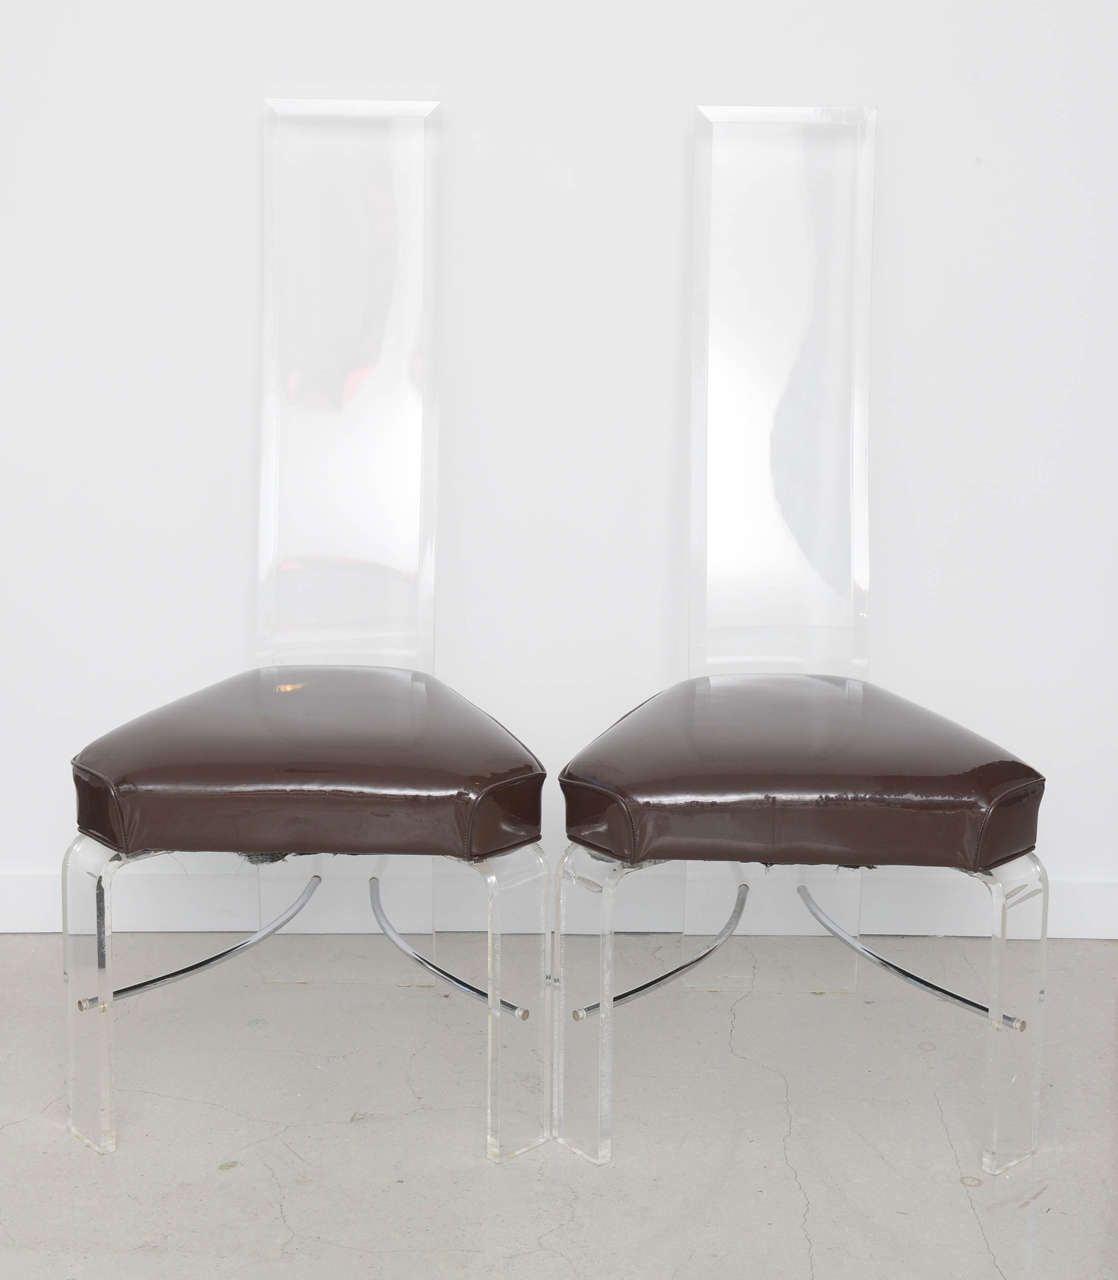 Set of four Lucite and chrome chairs by Alessandro Albrizzi.